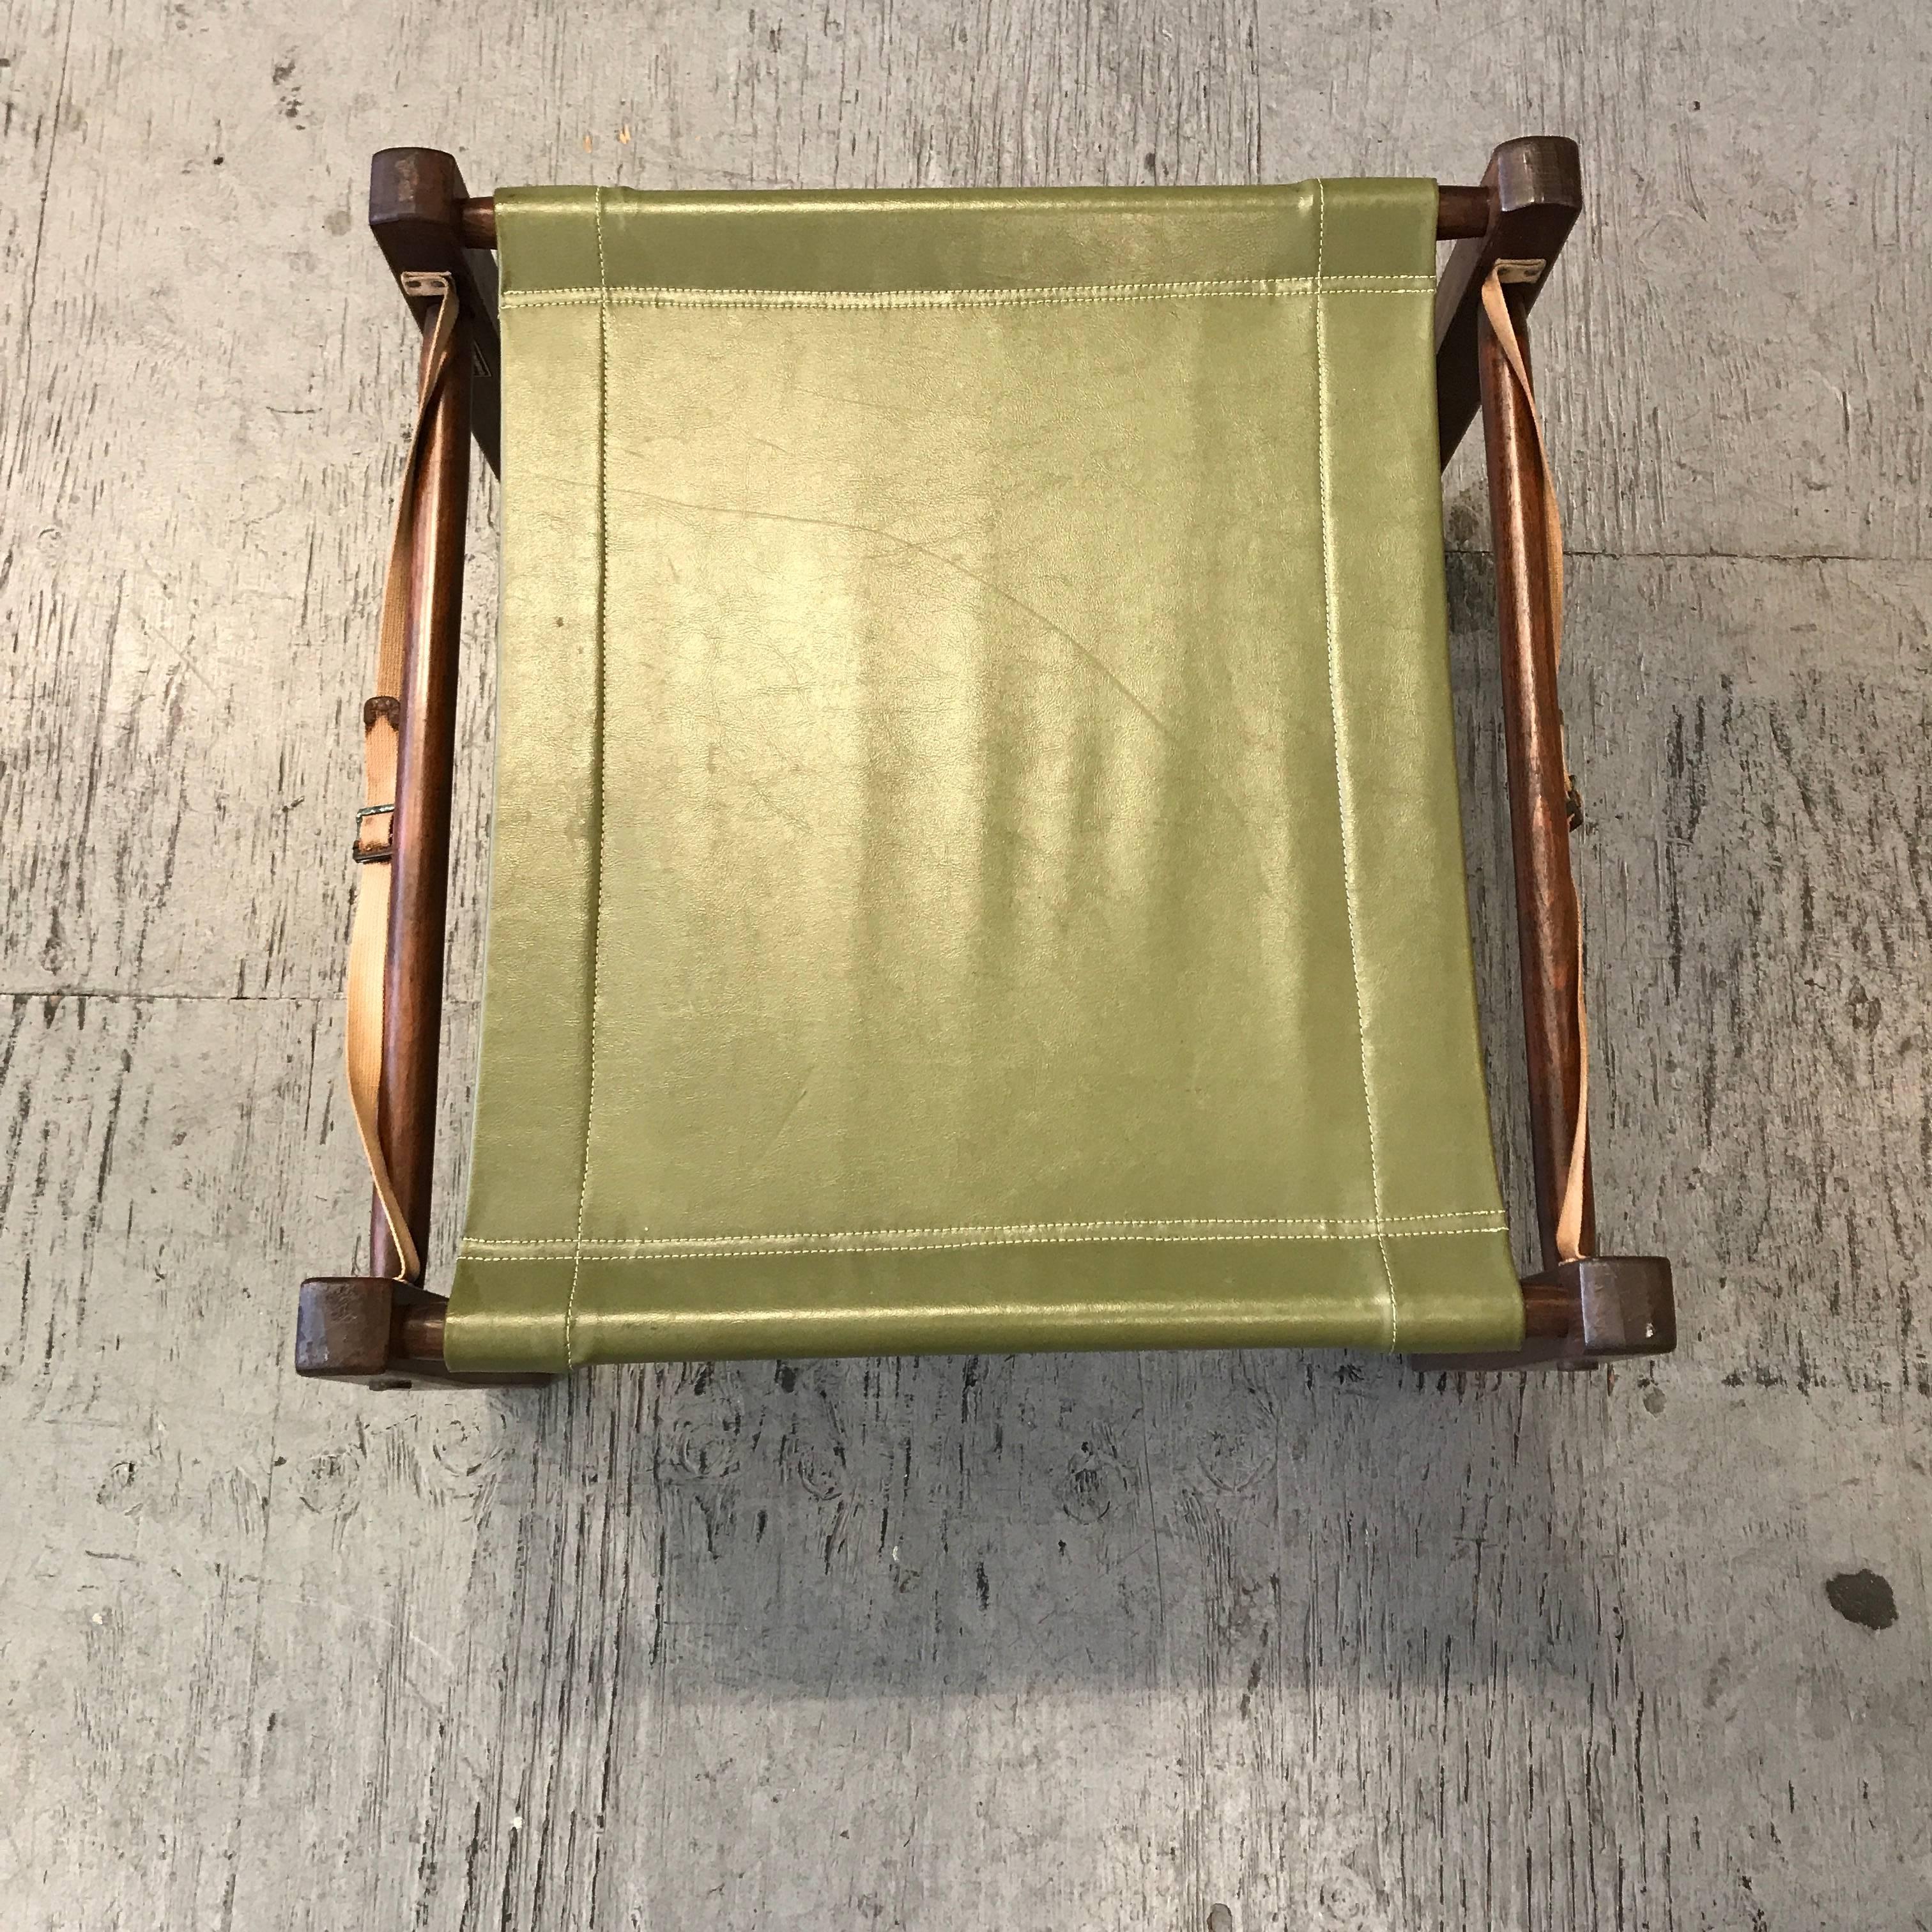 Break down camping / campaign ottoman by Gold Medal Folding Furniture, designed to come apart and roll up into a compact unit, green vinyl fabric cover and two canvas straps attached to the wooden frame.